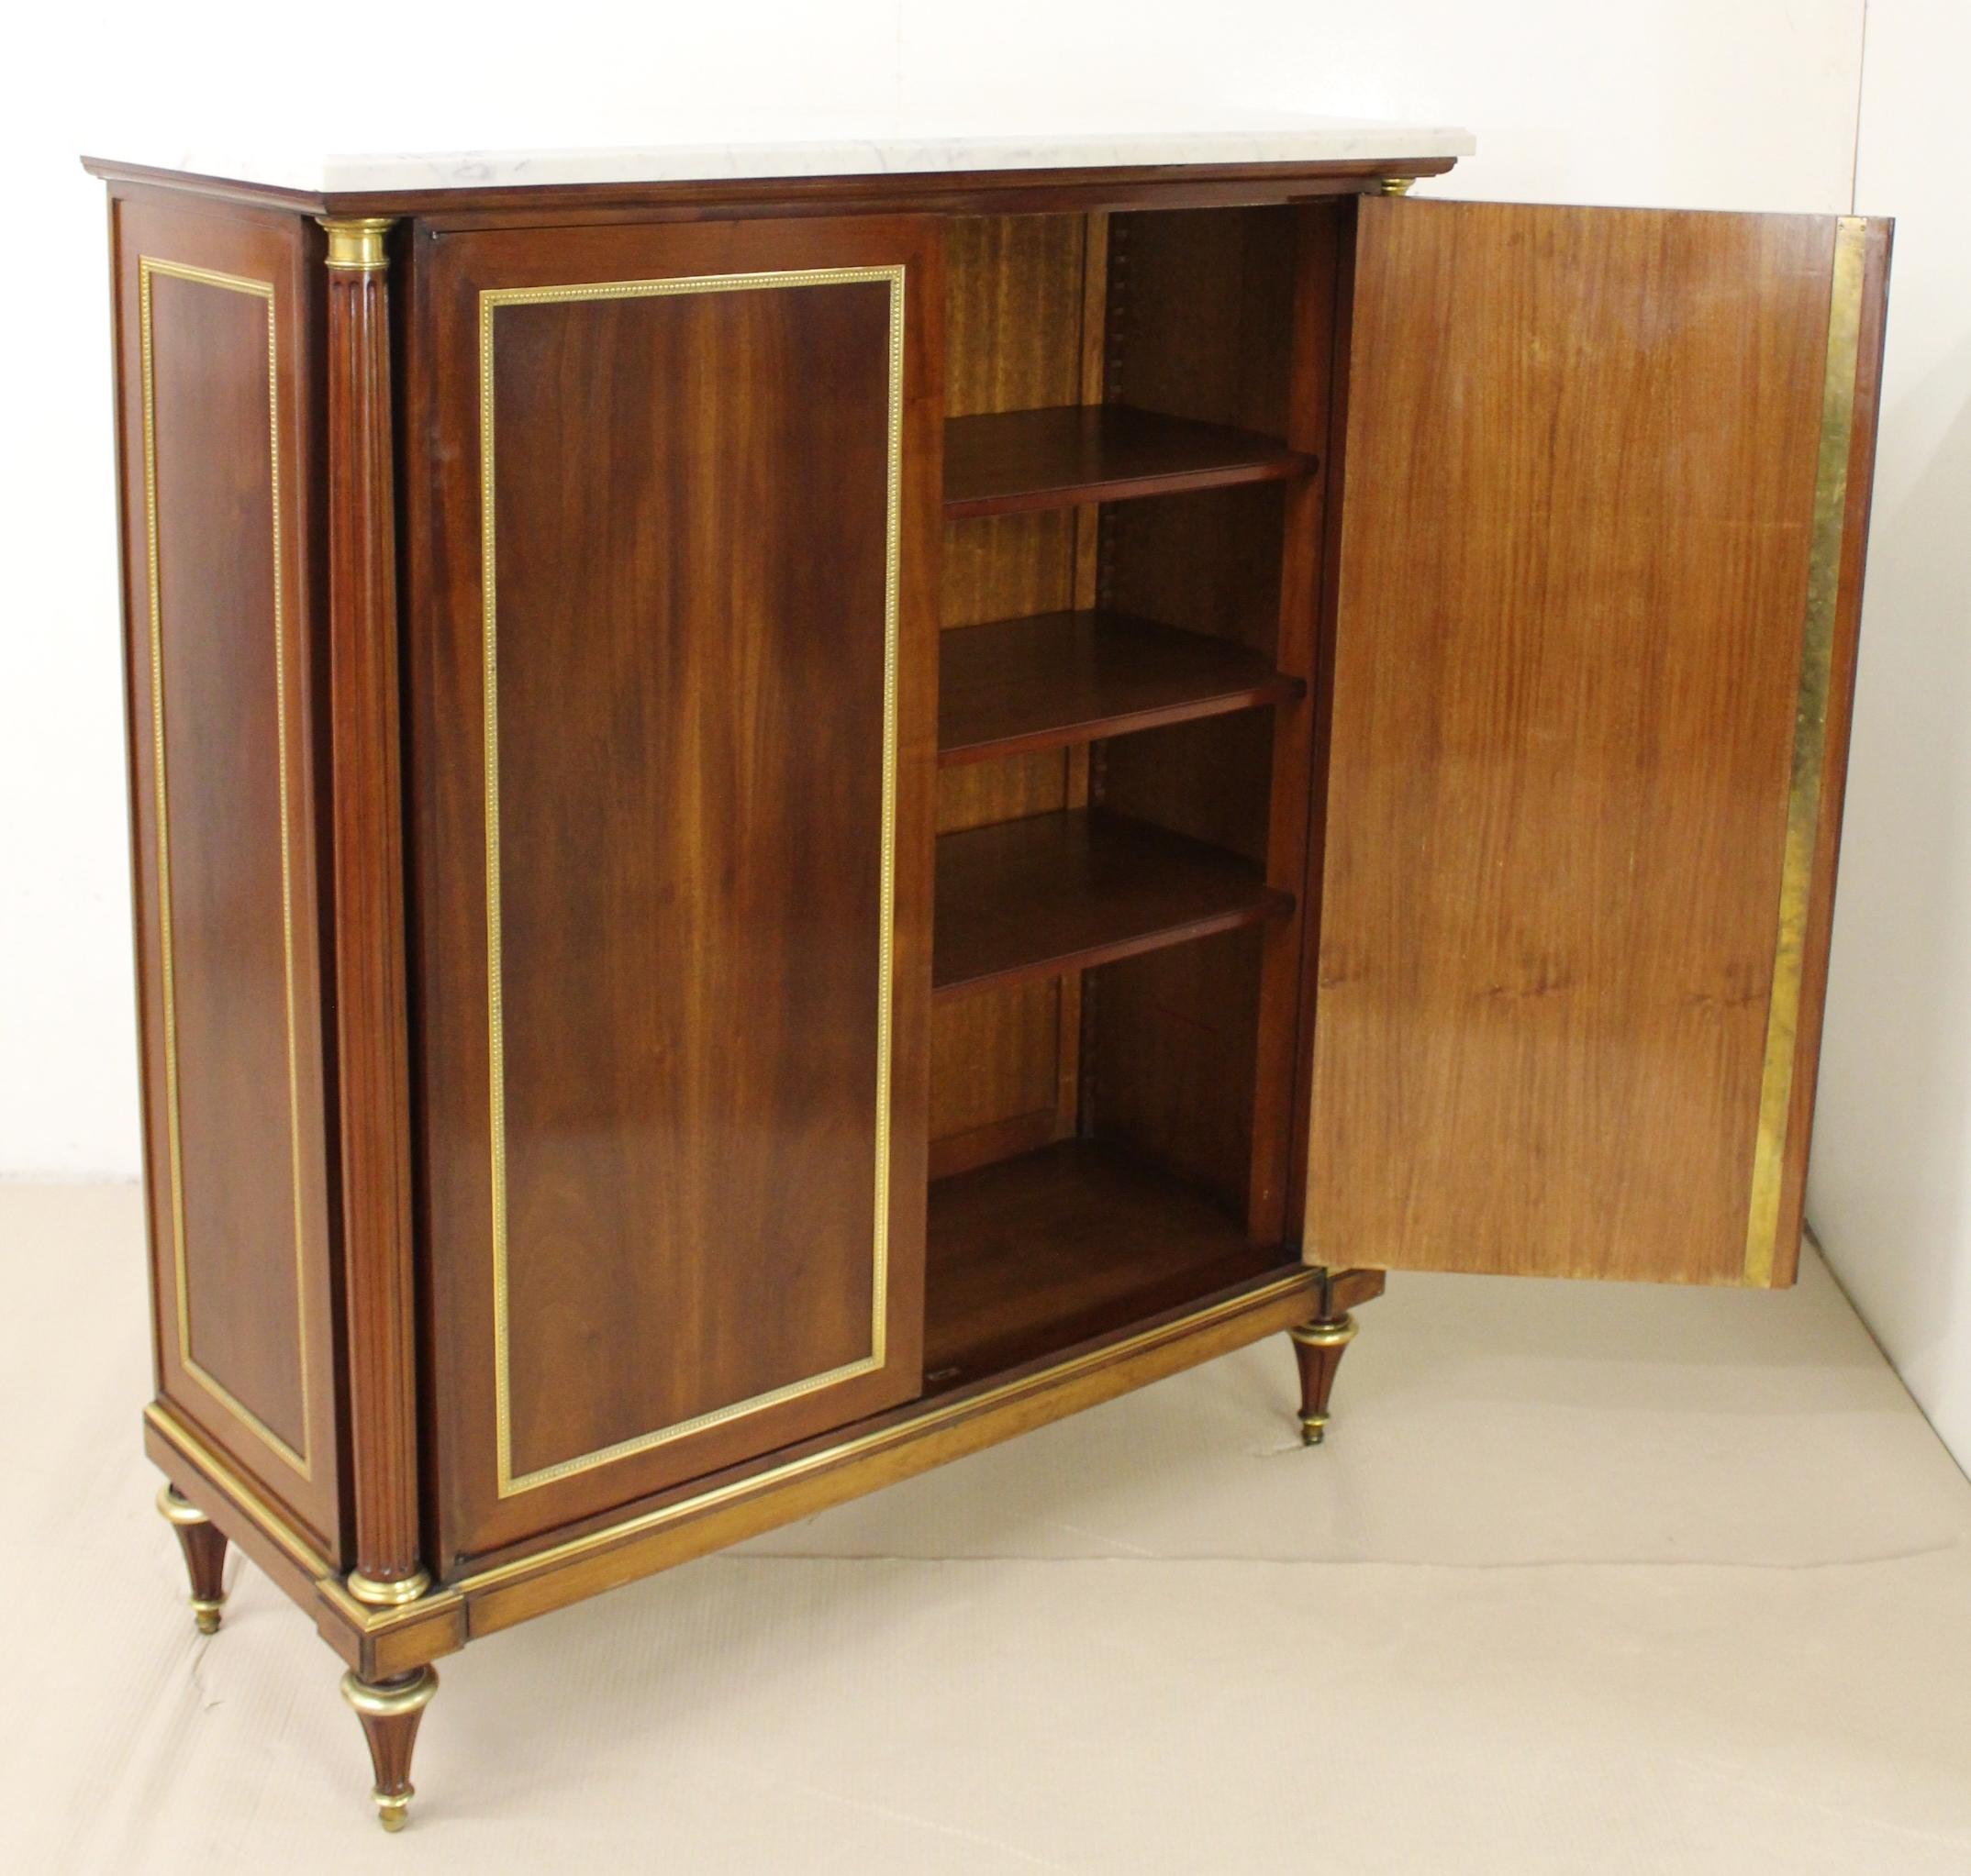 A splendid pair of French mahogany side cabinets of the finest quality. Exceptionally well made by the renowned Parisian cabinet maker Maurice Rinck. Constructed in a high grade of dense mahogany timber and fitted with white marble tops. Each has a